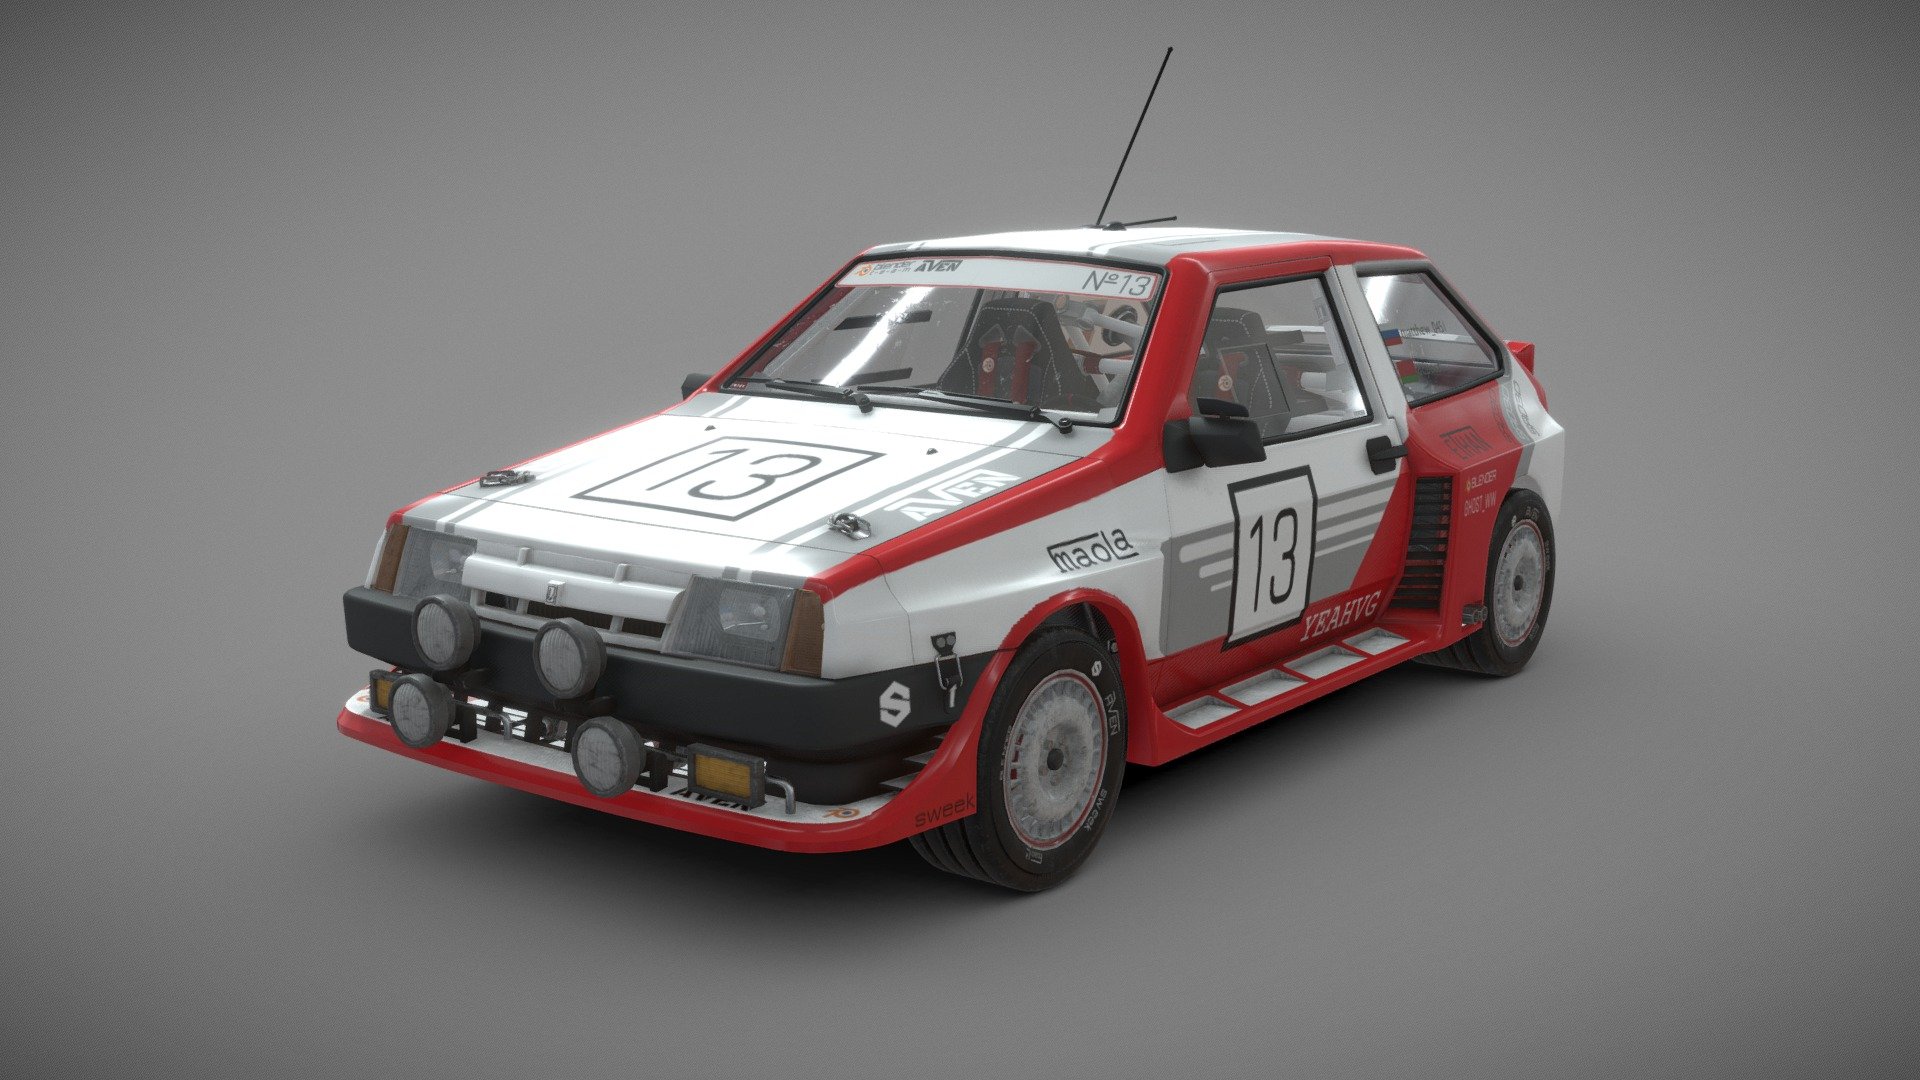 3D model of the VAZ-2108 car, which was redesigned for the rally championship. 
VAZ-2108 &ldquo;Sputnik